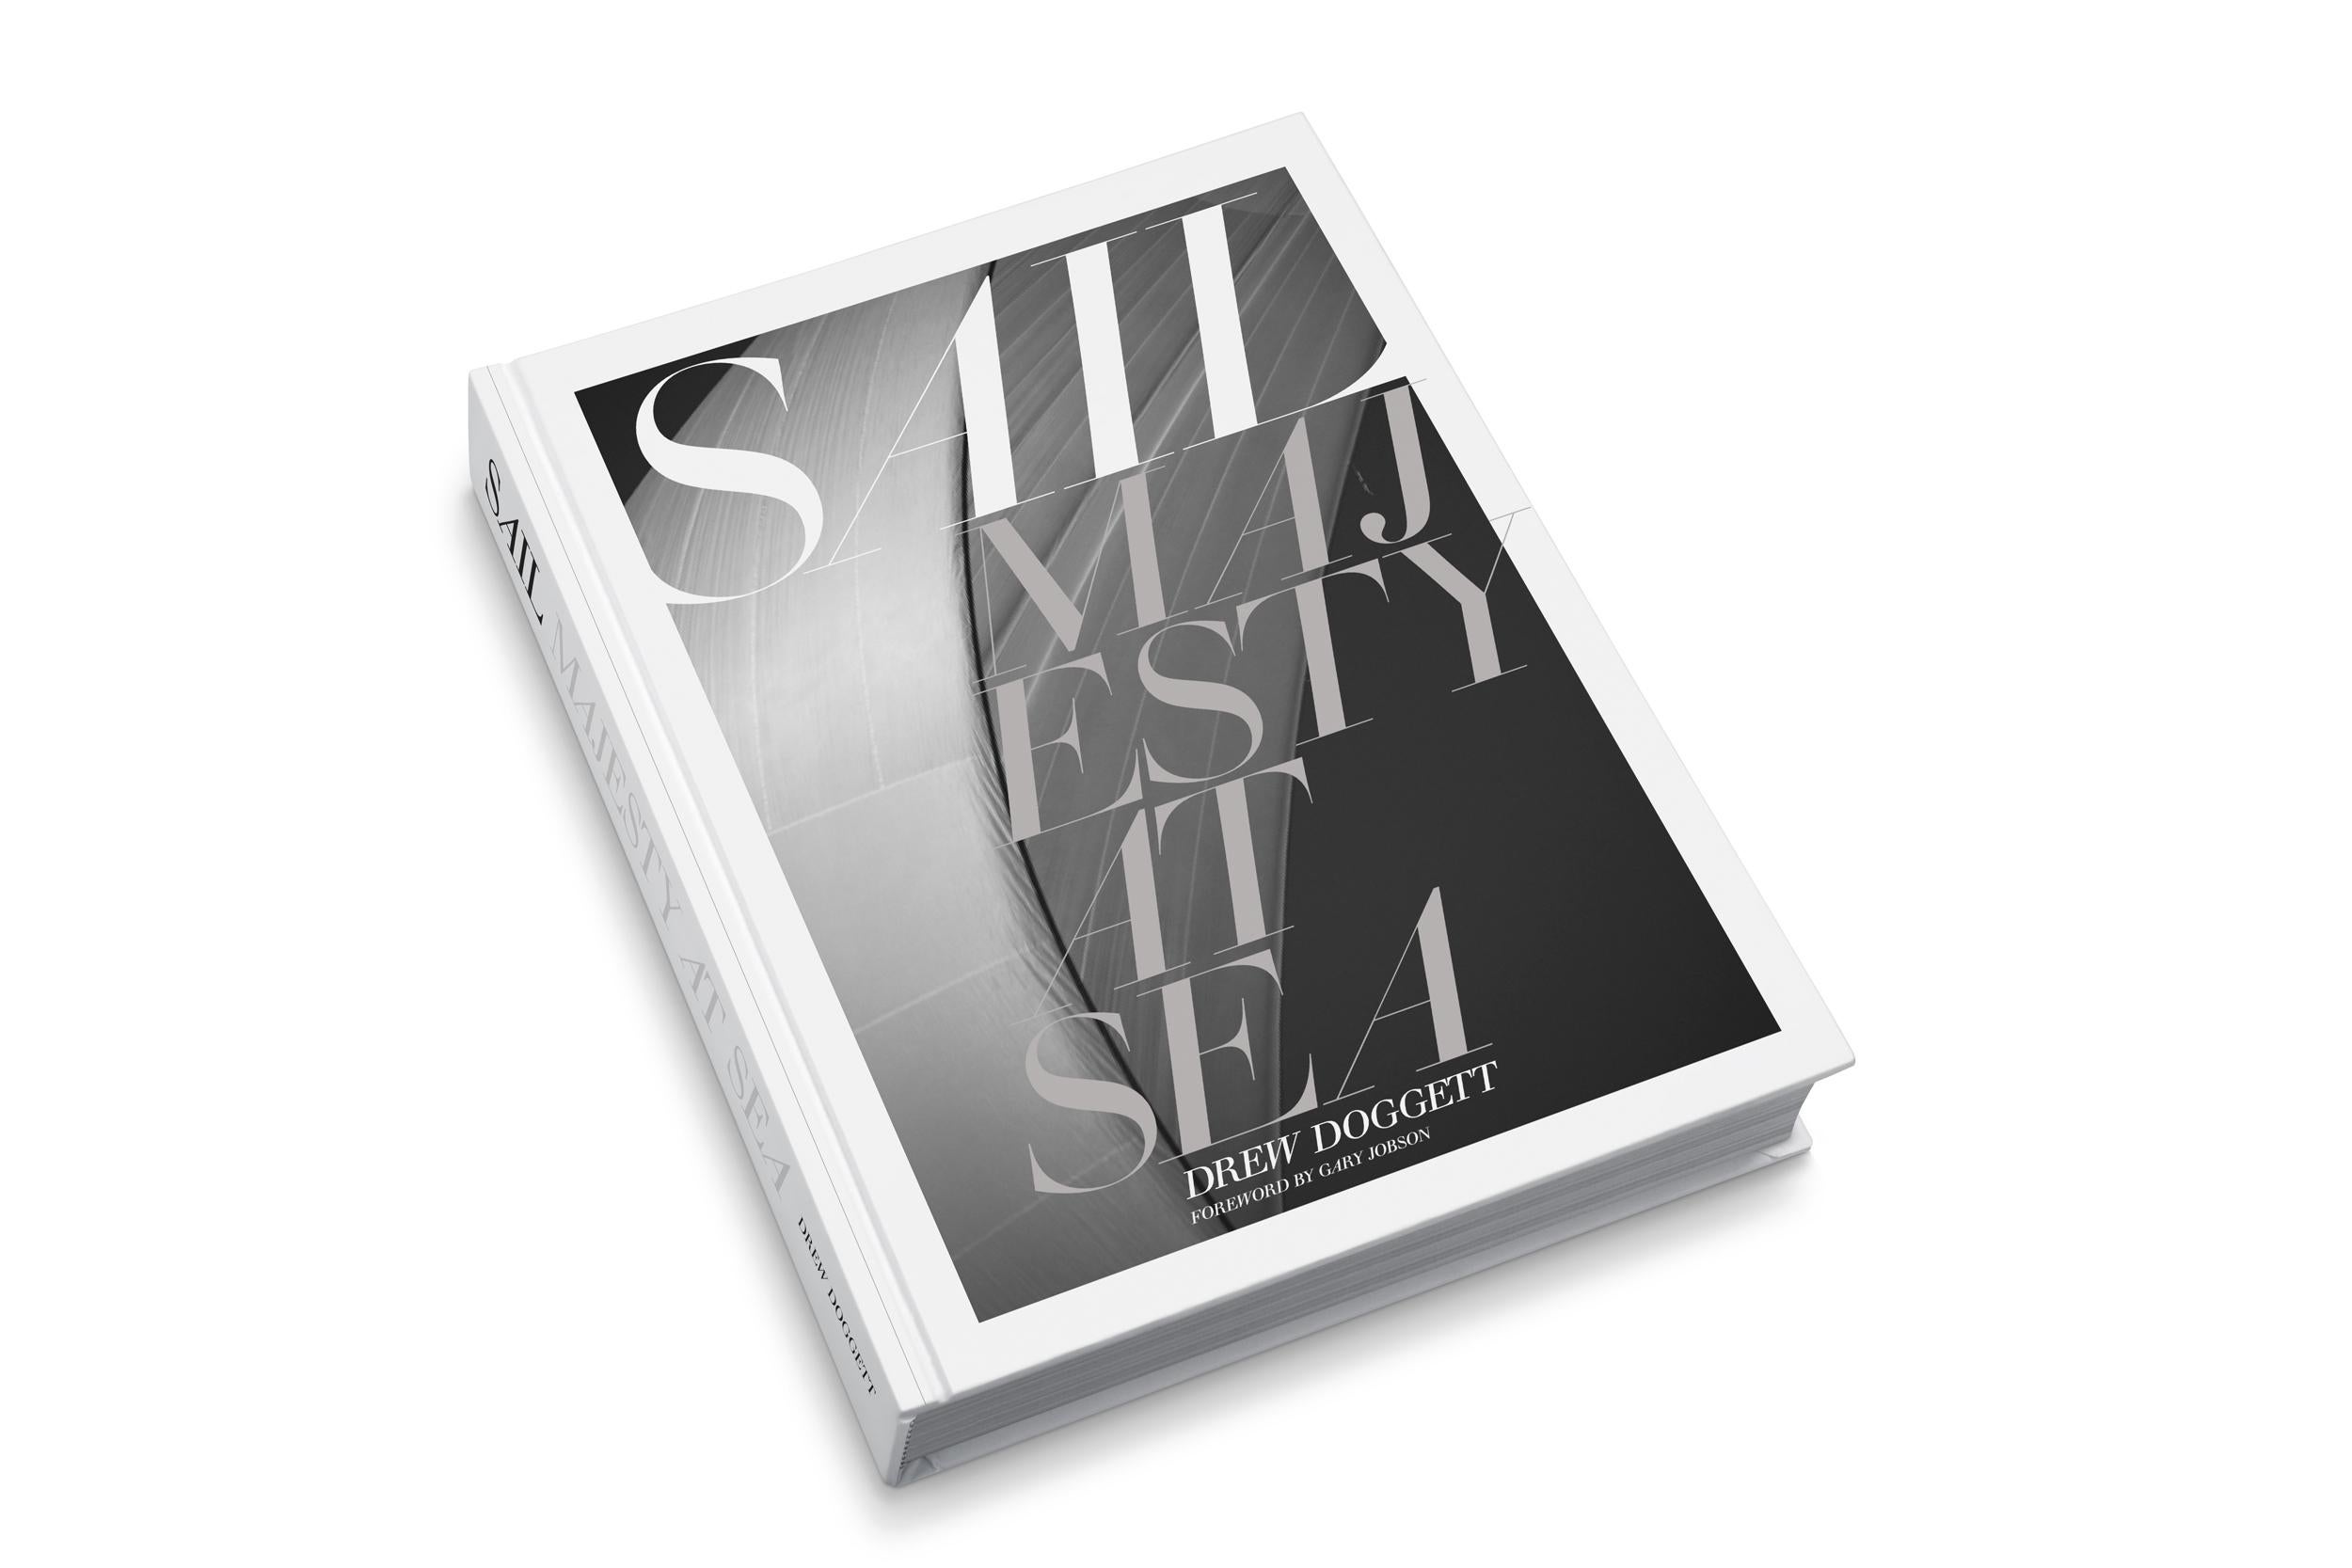 NOTE ON AVAILABILITY

There is a limited number of signed copies of this award winning book left.

Sail: Majesty at Sea is an intimate look into the world of rare, J-Class and 12-Meter racing sailboats and their enduring beauty, power and speed as